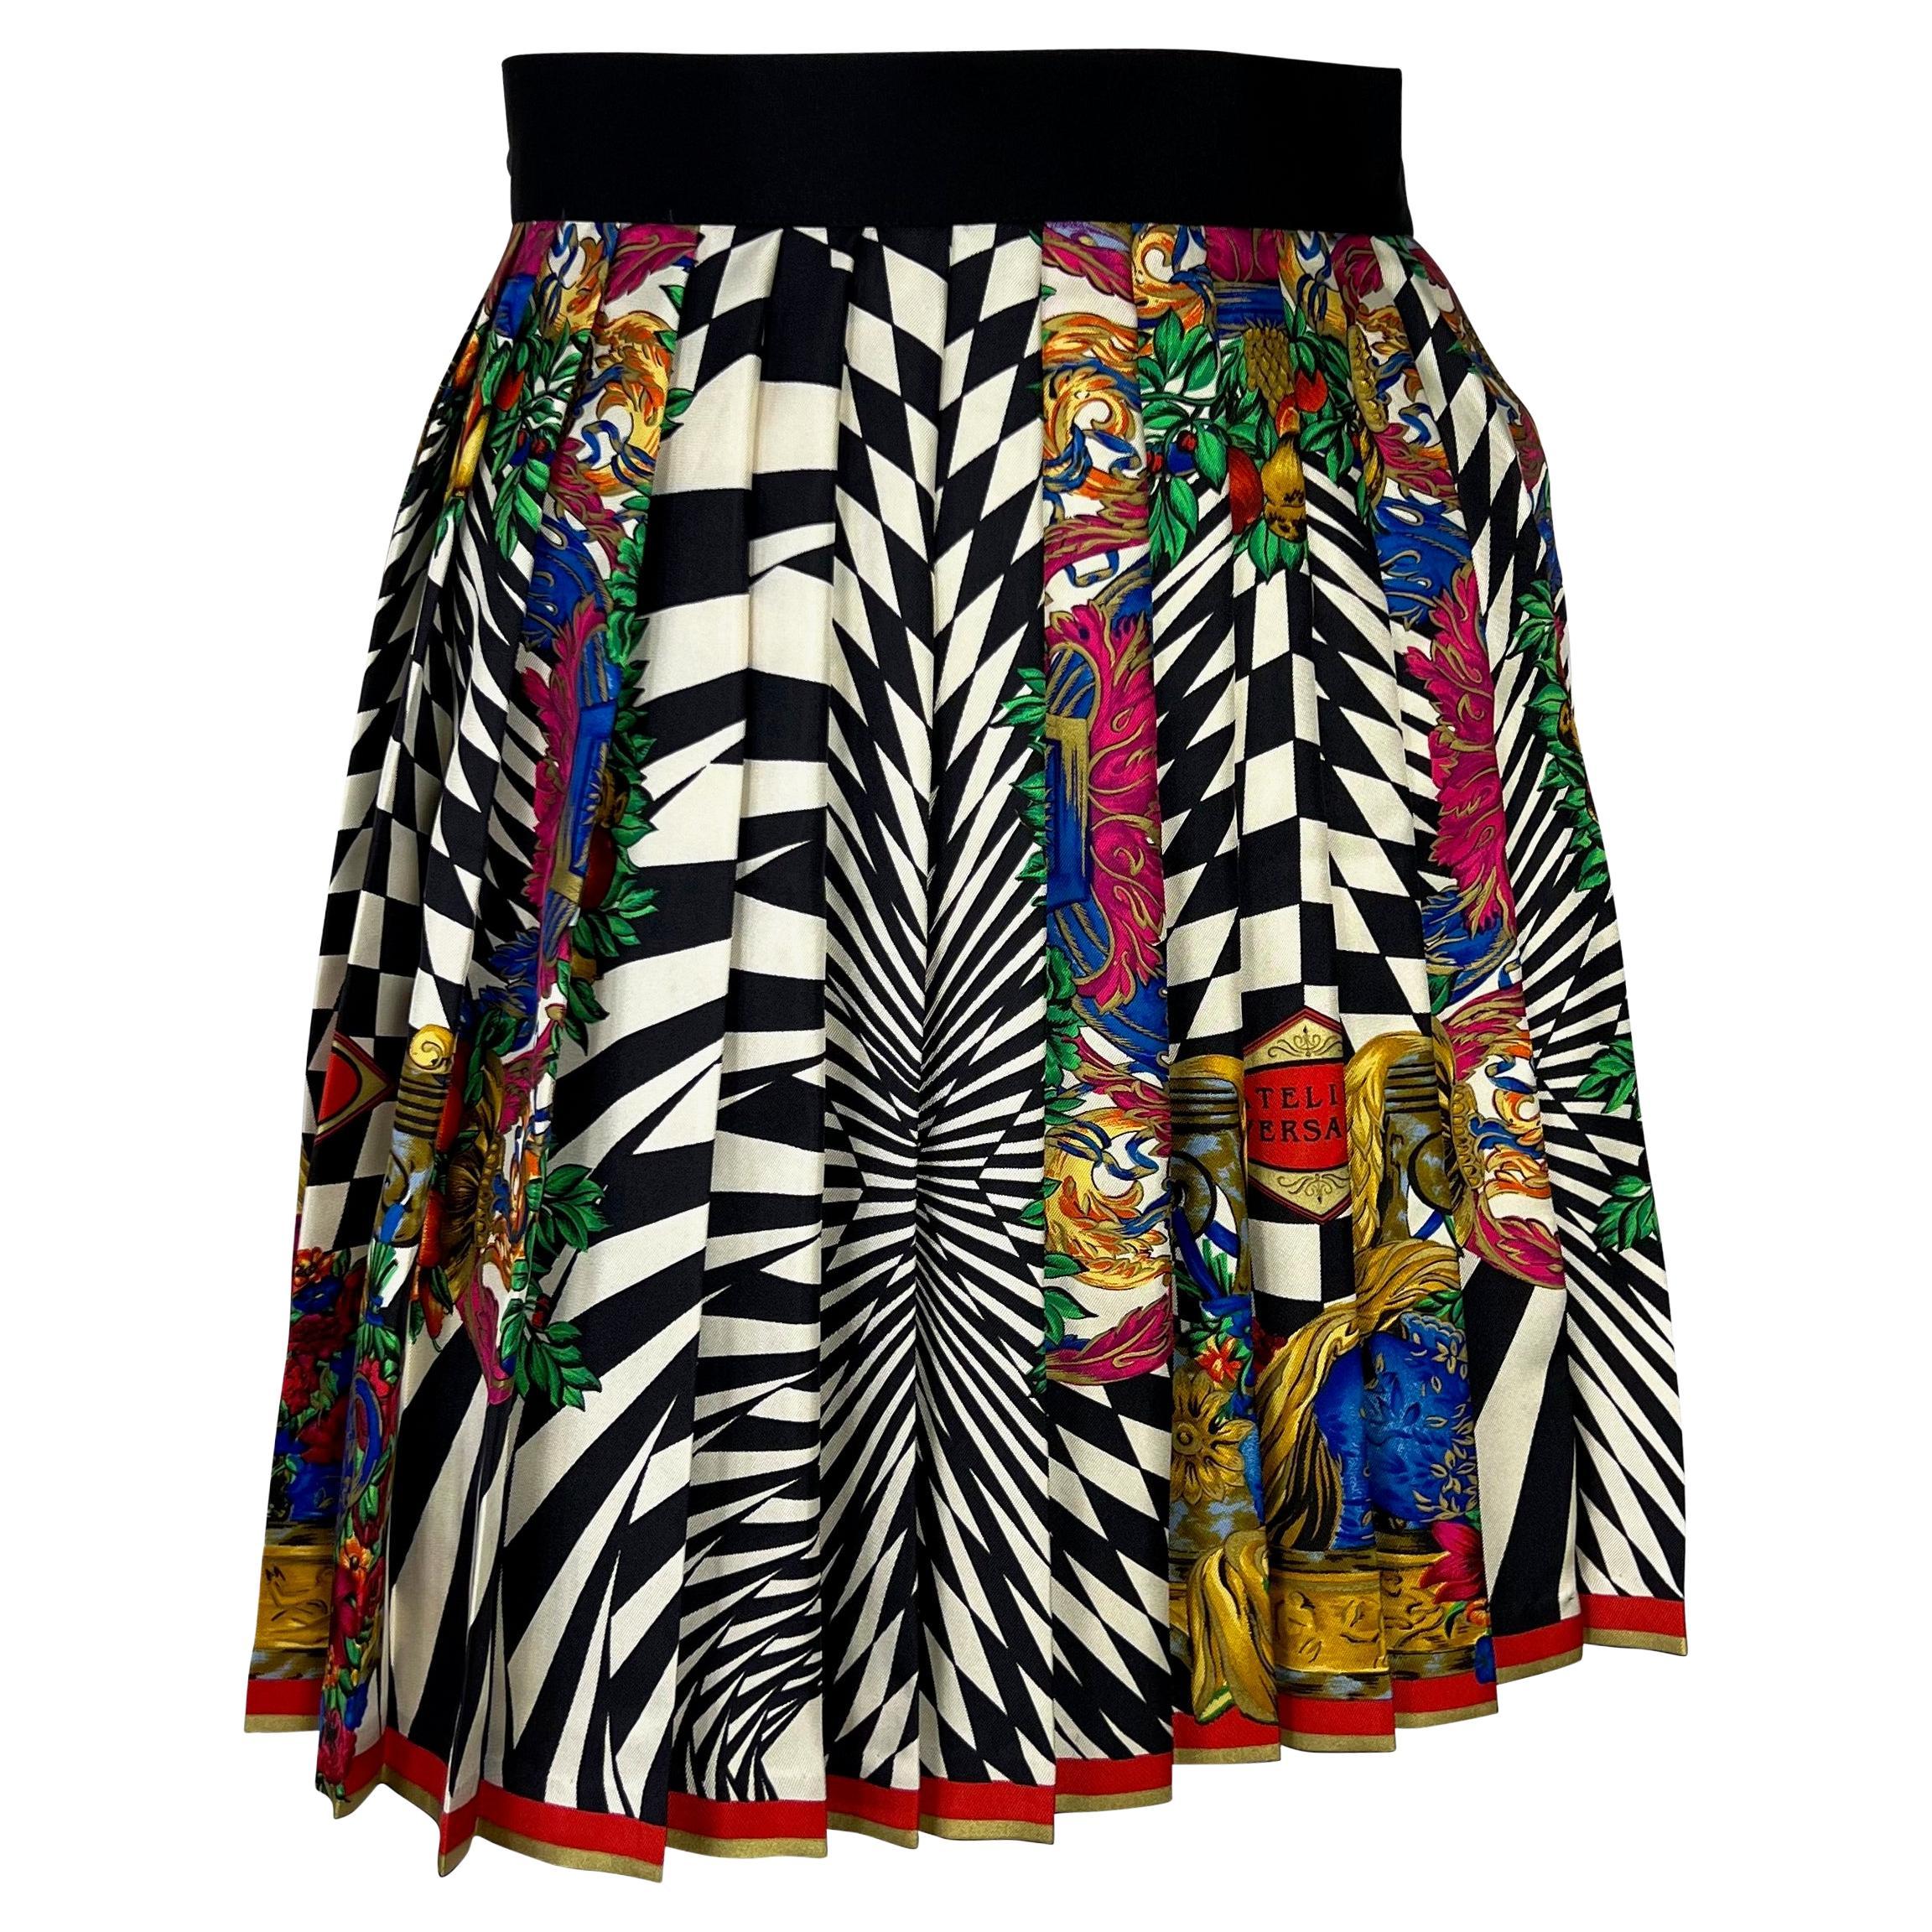 F/W 1991 Gianni Versace Couture Op Art Atelier Print Pleated Skirt Blouse Set In Good Condition For Sale In West Hollywood, CA